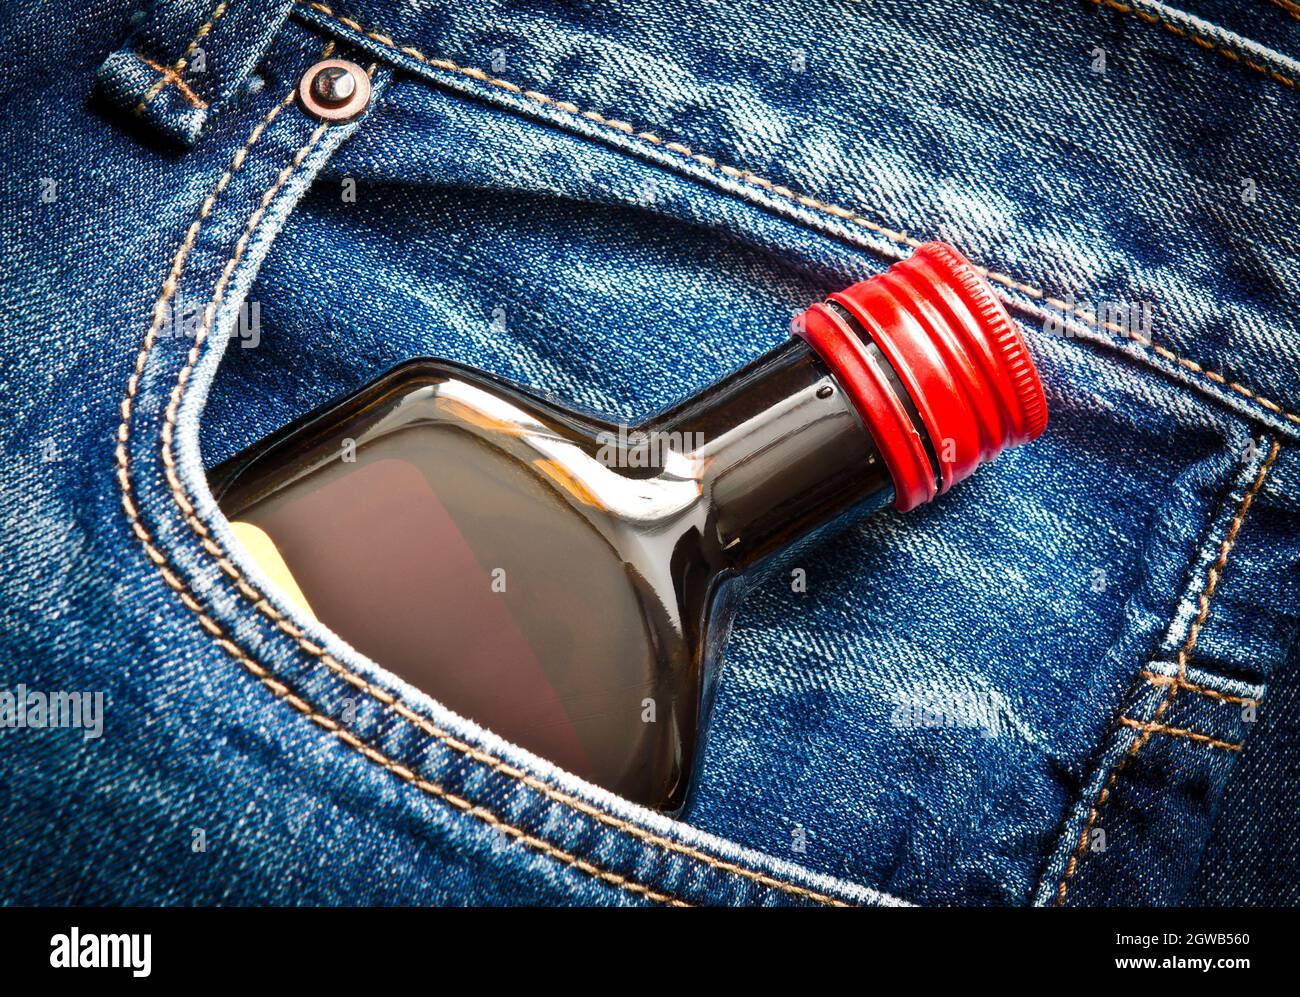 High Angle View Of Bottle In Jeans Pocket Stock Photo